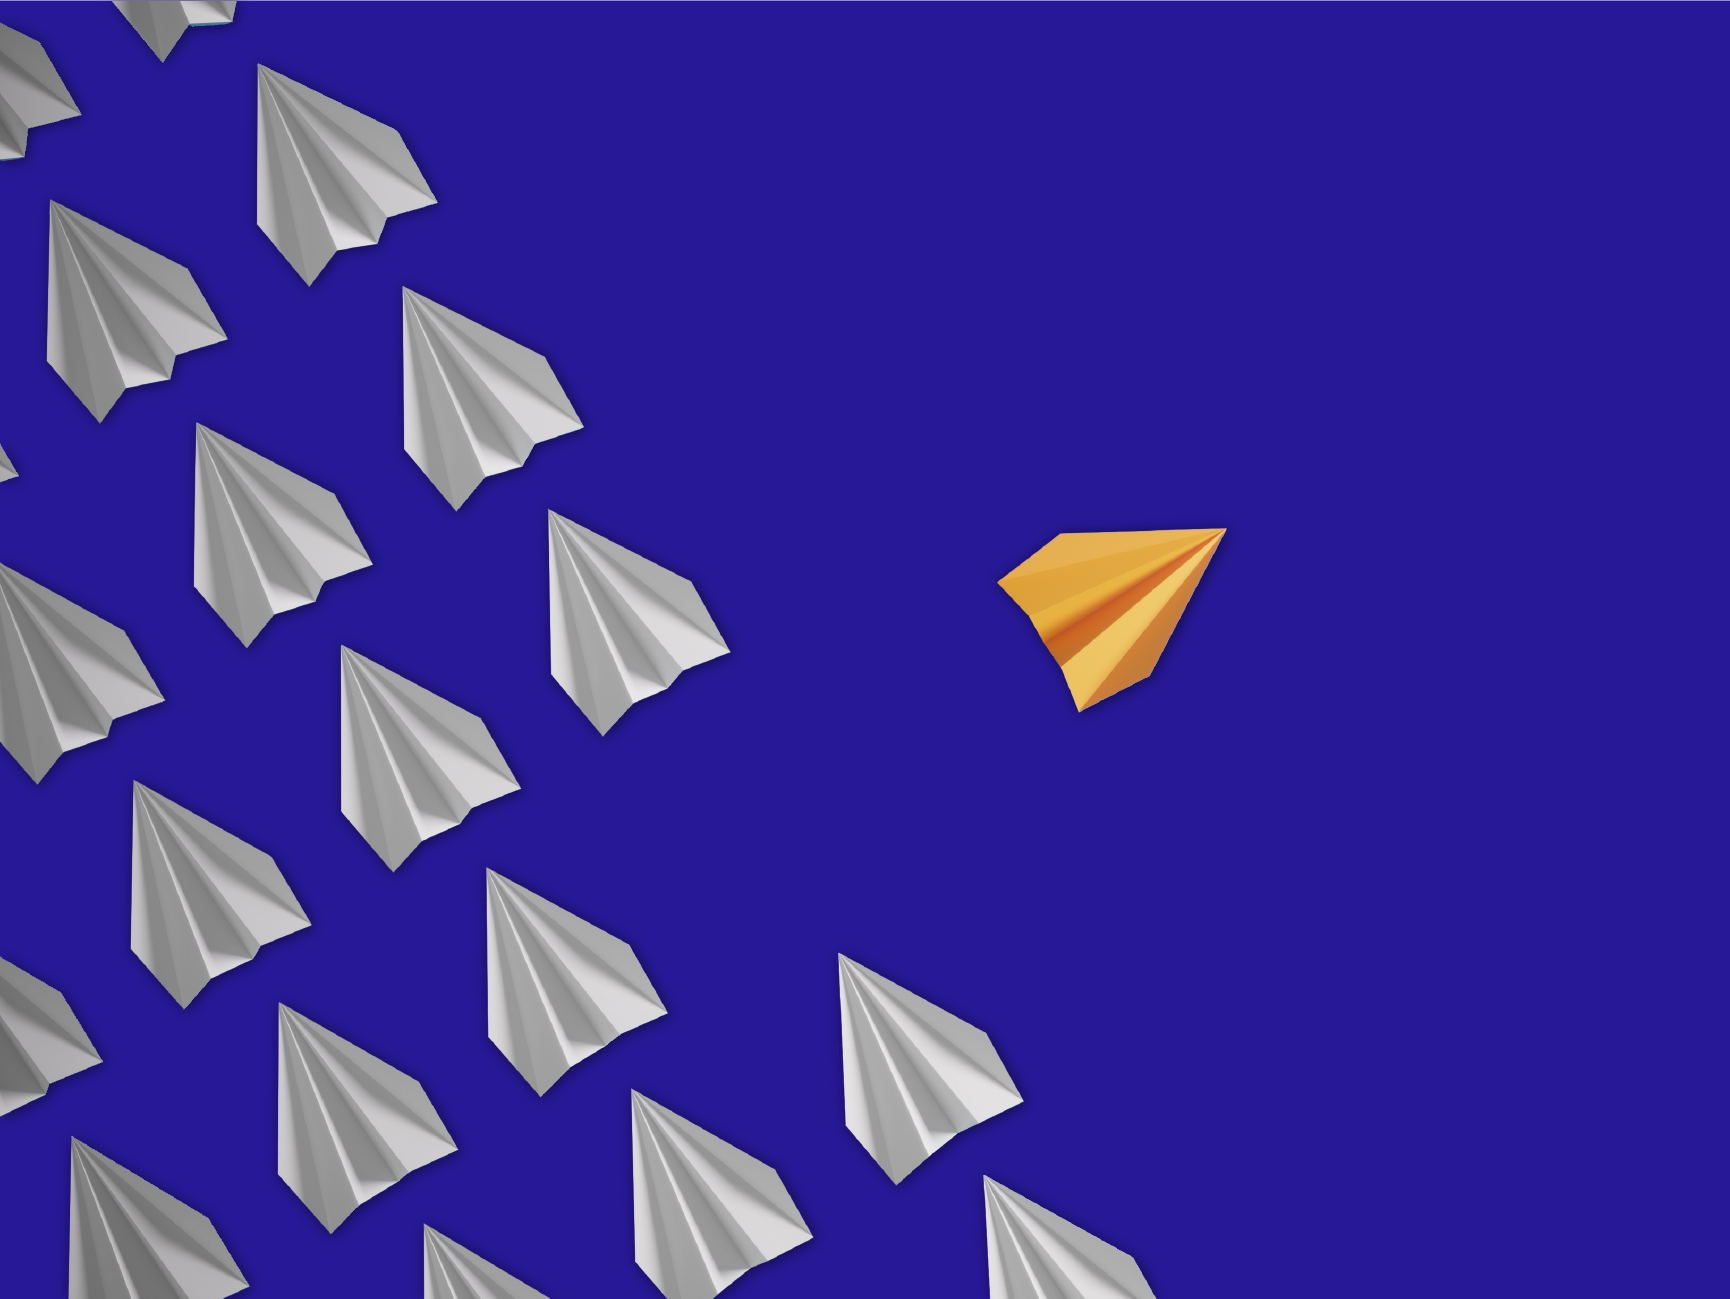 collection of paper planes flying in one direction, with one yellow plane flying in the opposite direction